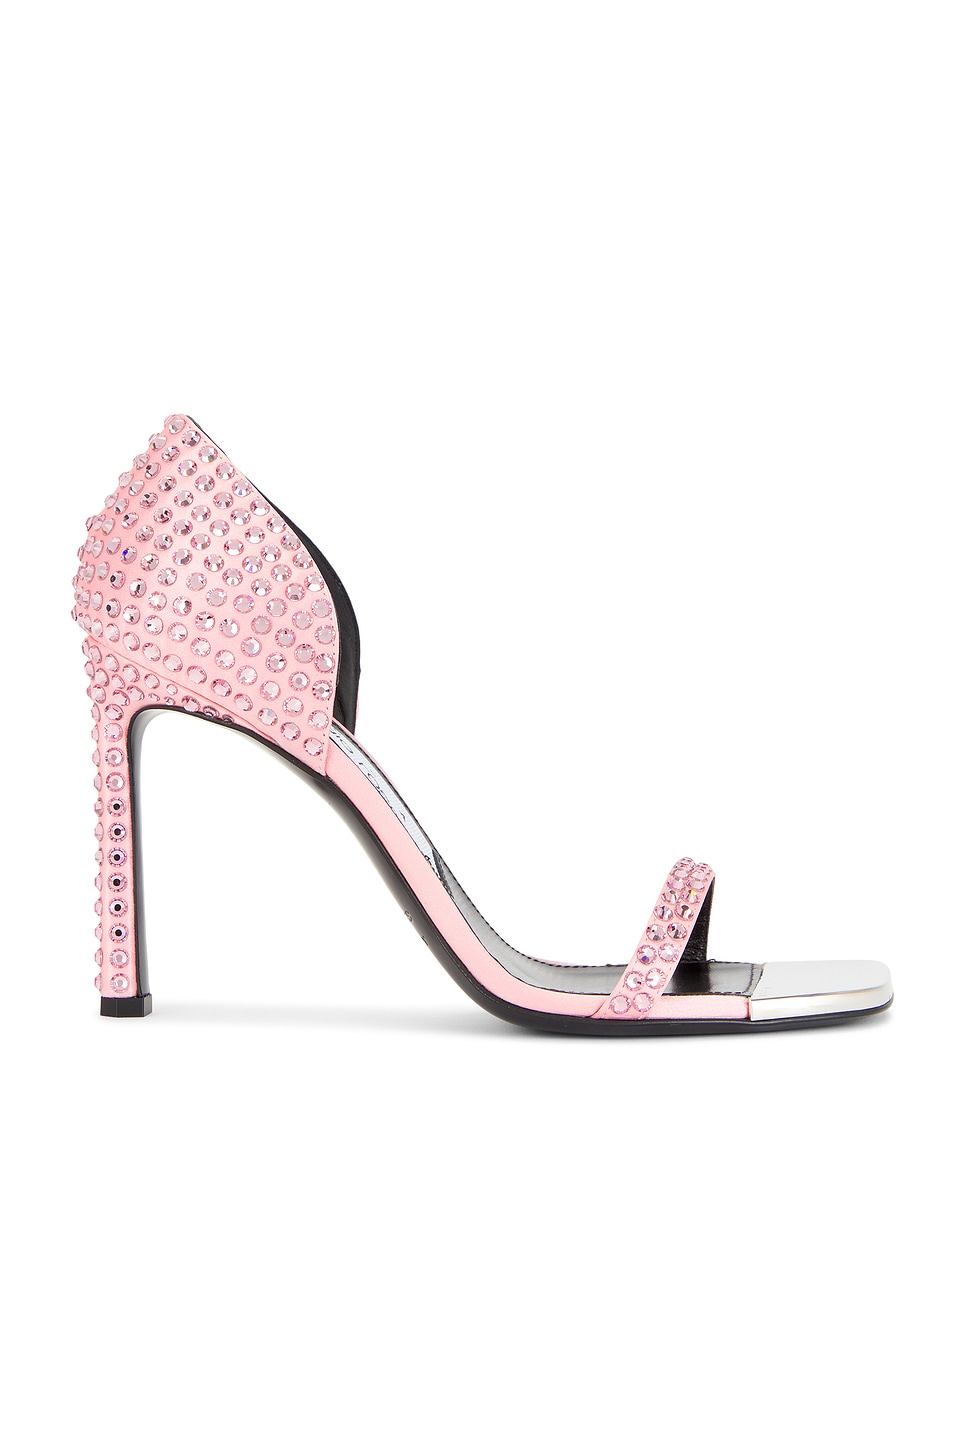 X Sergio Rossi 95 Sandal in Pink